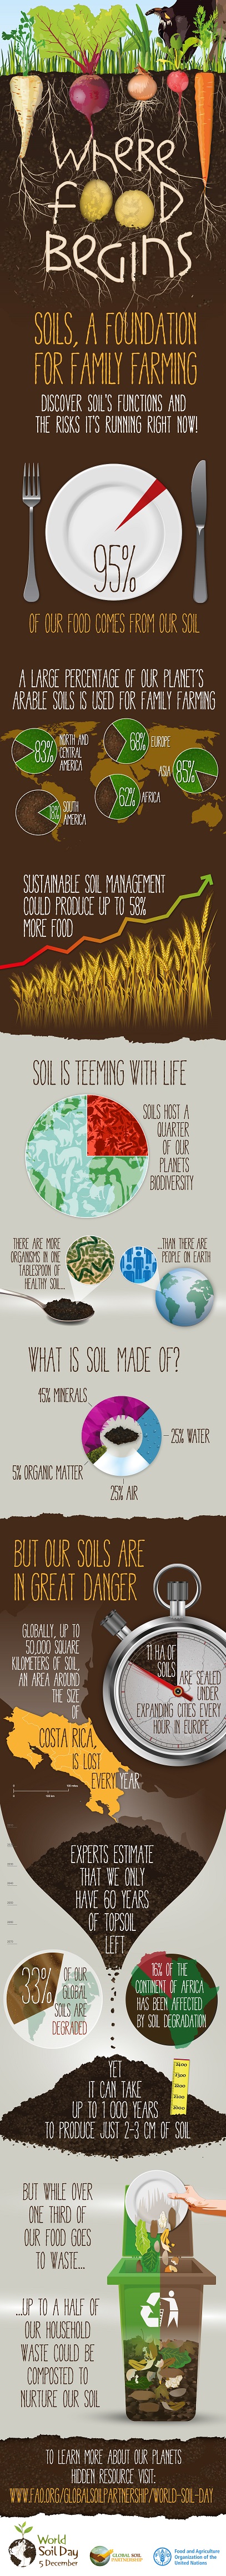 Soil infographic reduced